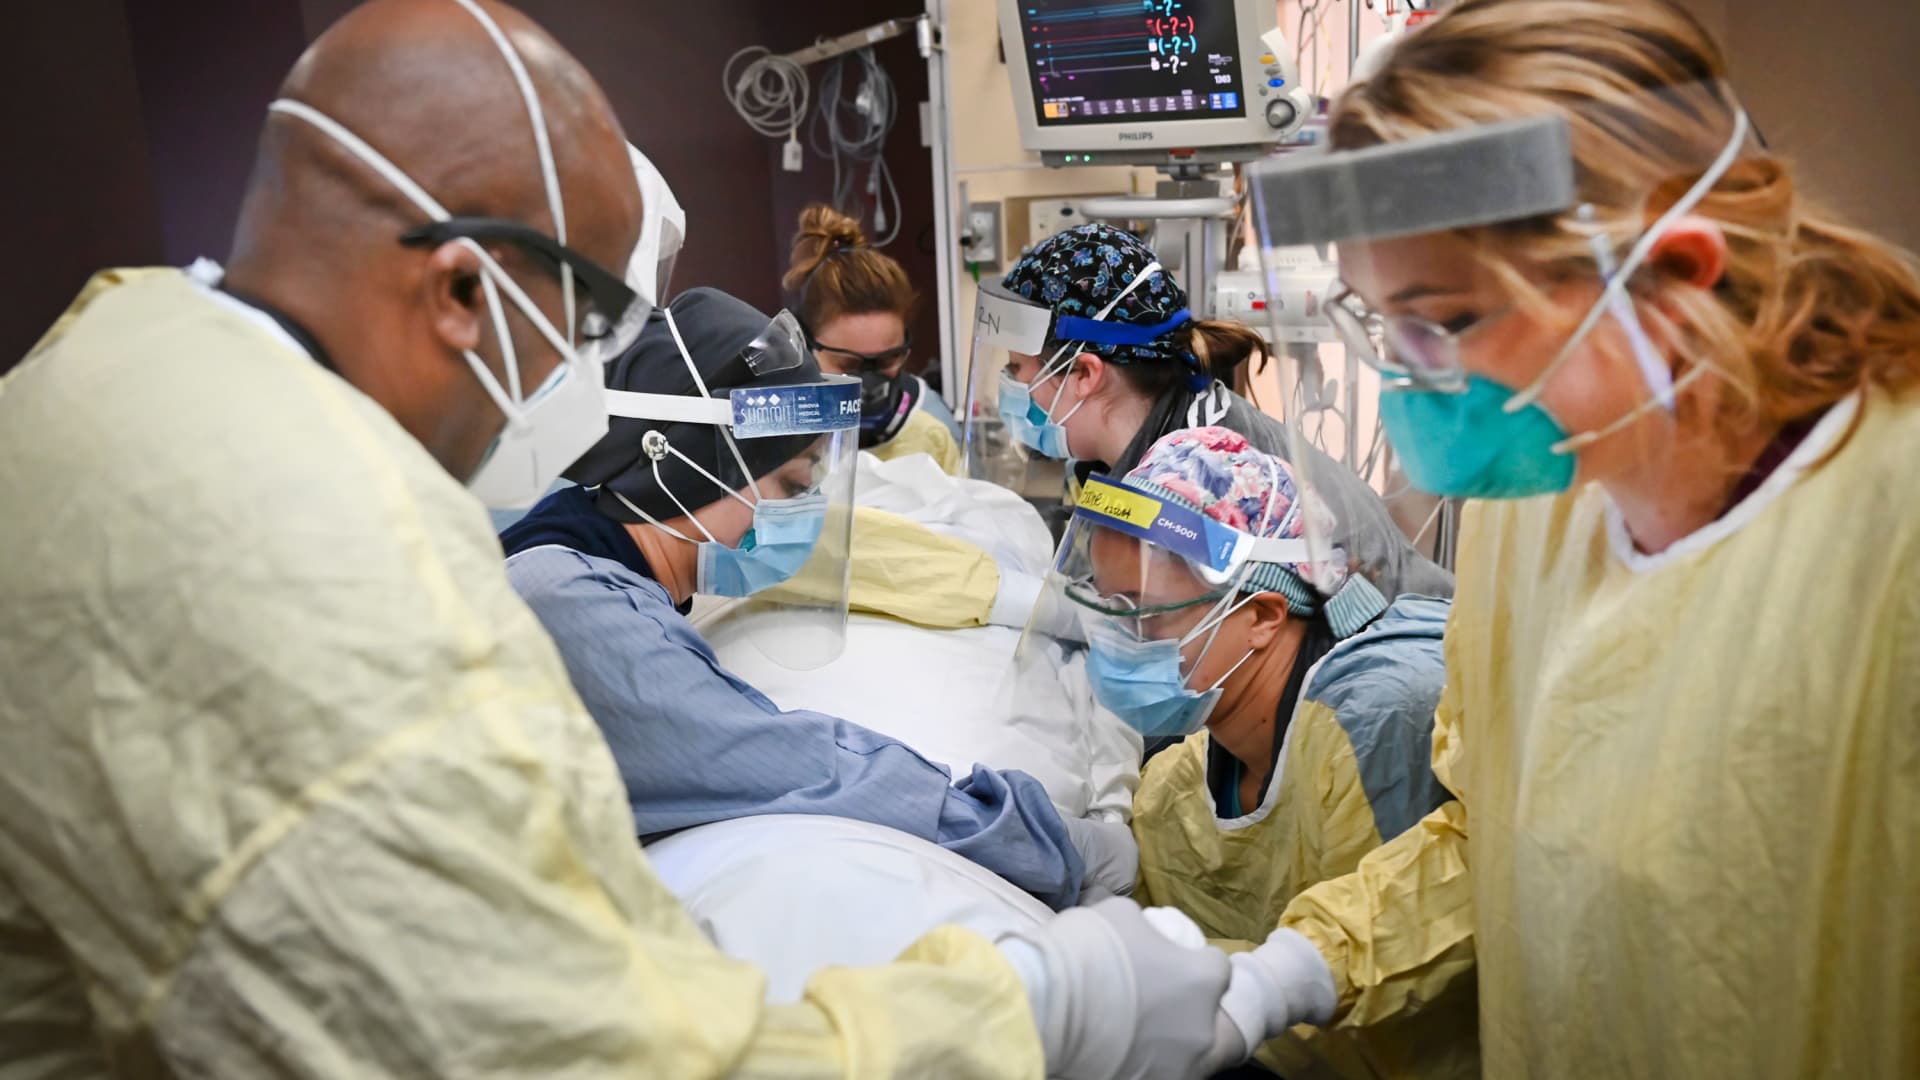 Healthcare workers in North Memorial's 2019s South Six and South Seven Intensive Care Units treated patients critically ill with COVID-19 on Monday, Dec. 7, 2020 at North Memorial Health Hospital in Robbinsdale, Minn.